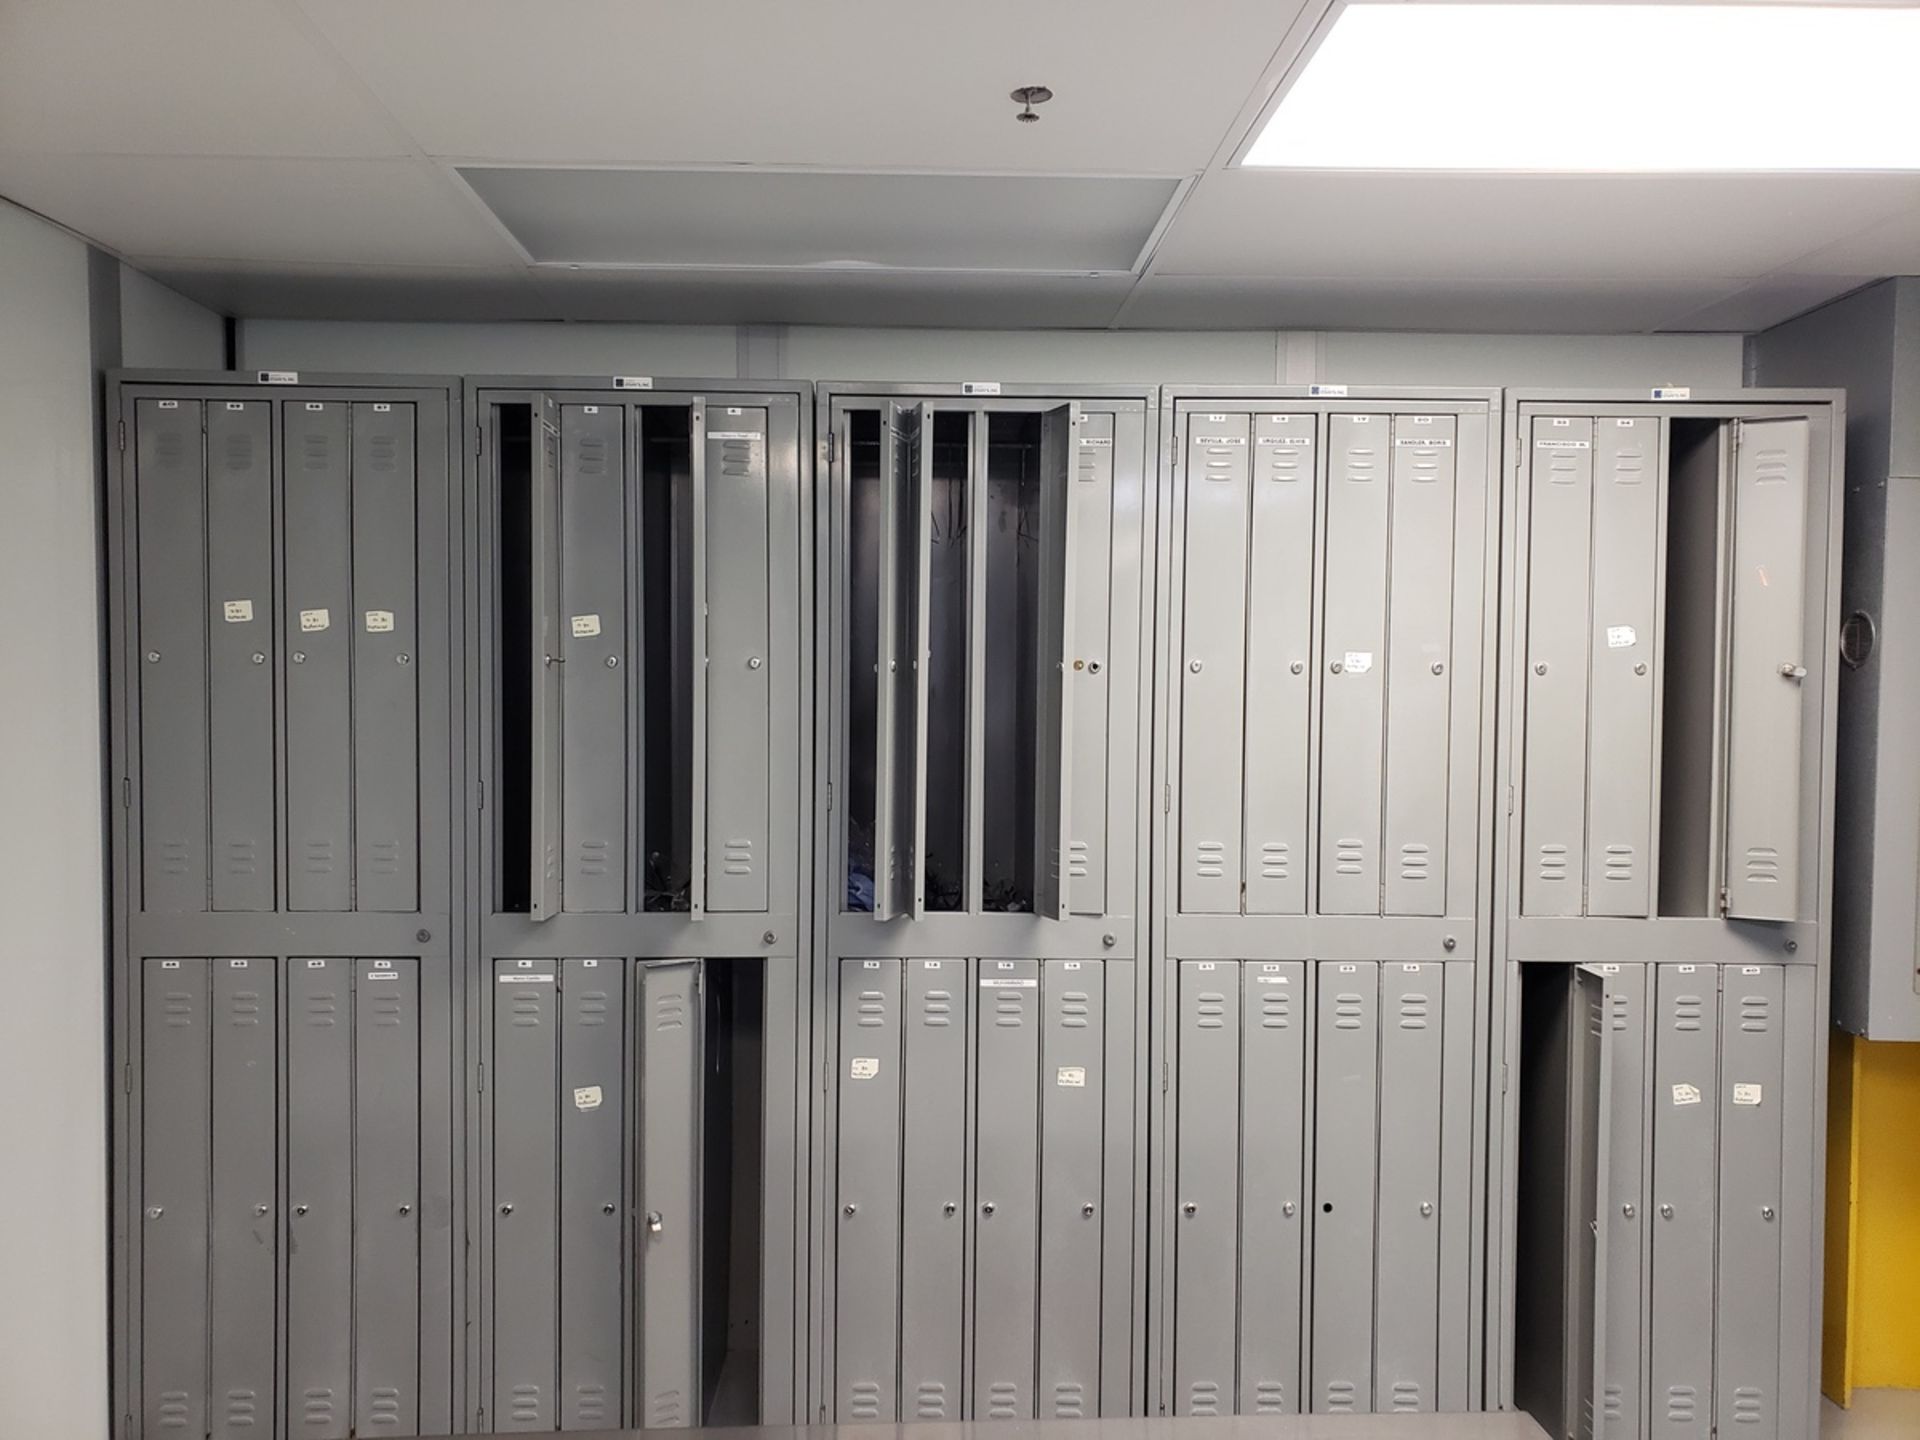 Lot of Employee Lockers | Rig Fee $300 - Image 2 of 2